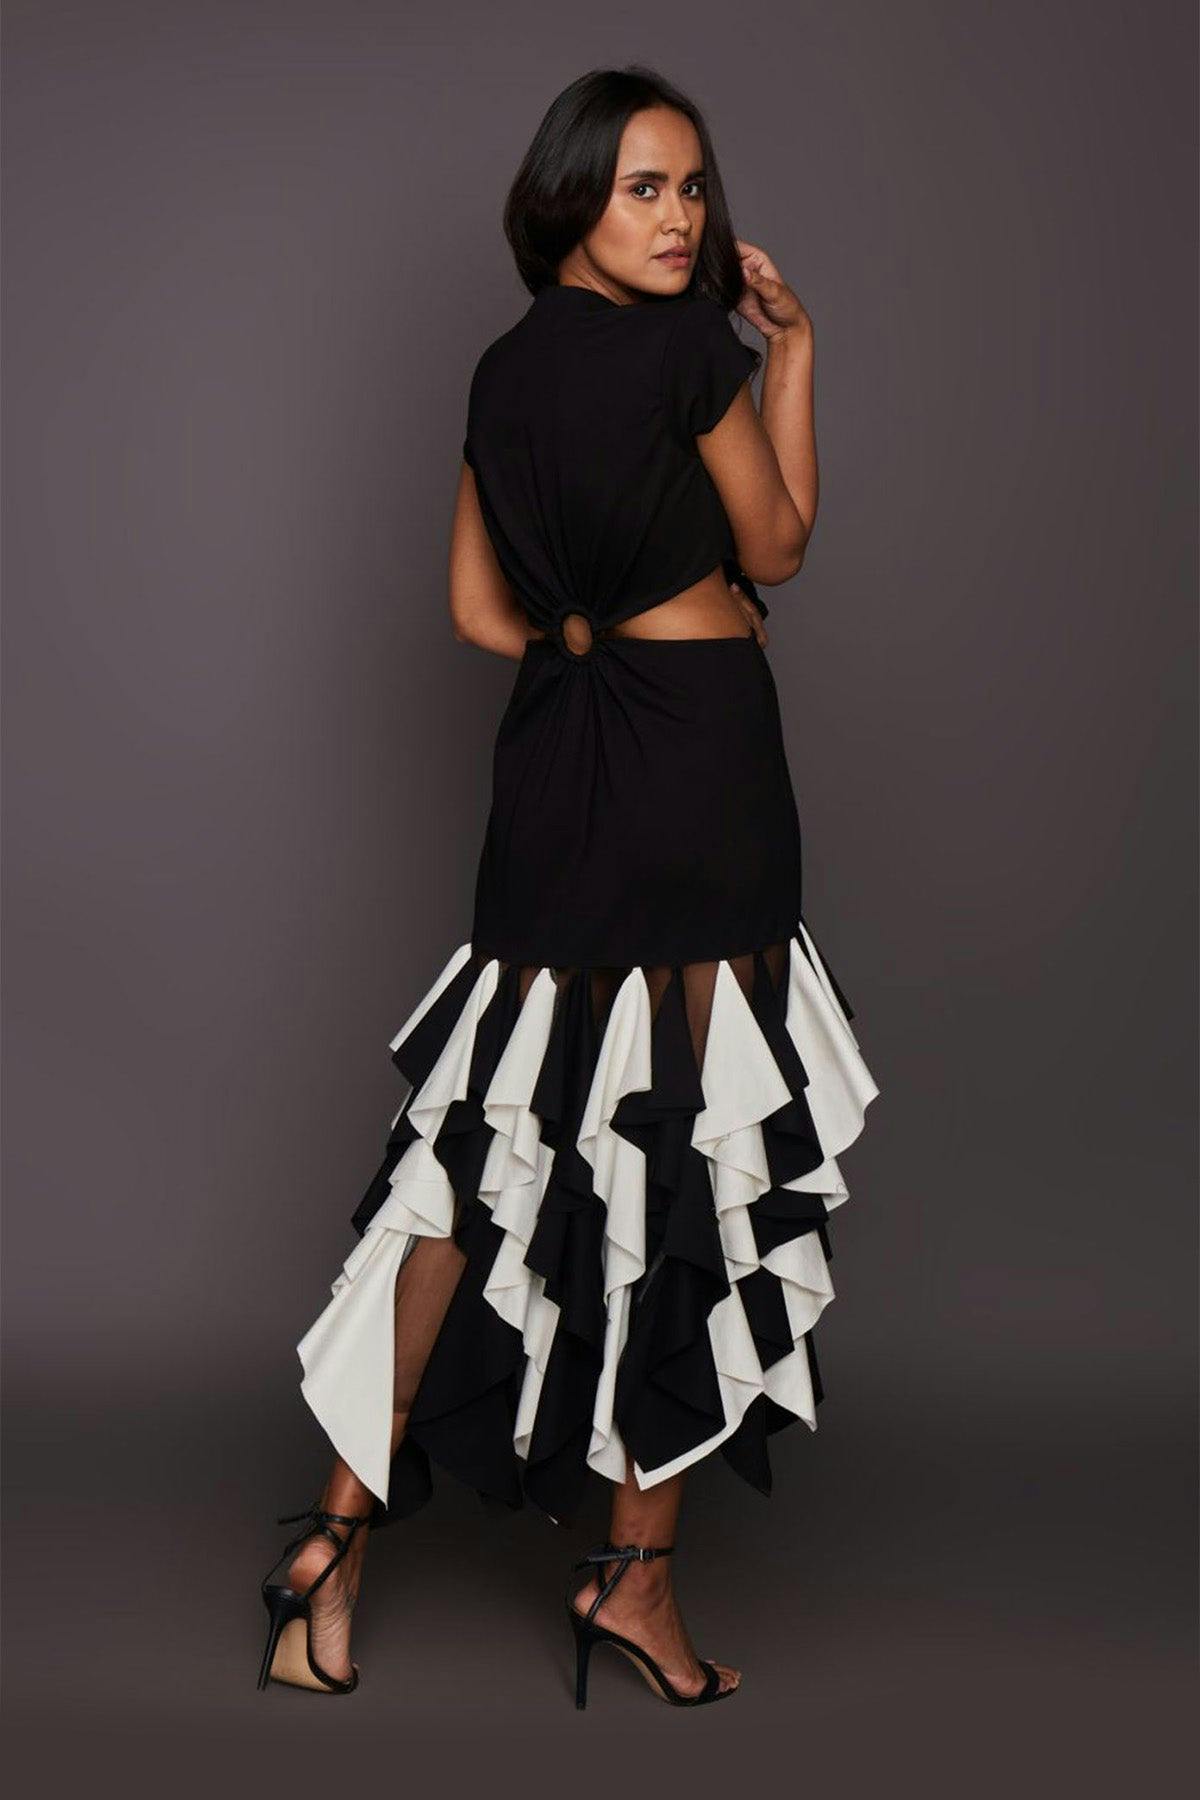 Thumbnail preview #3 for Black & White Side Cutout Dress With Ruffles